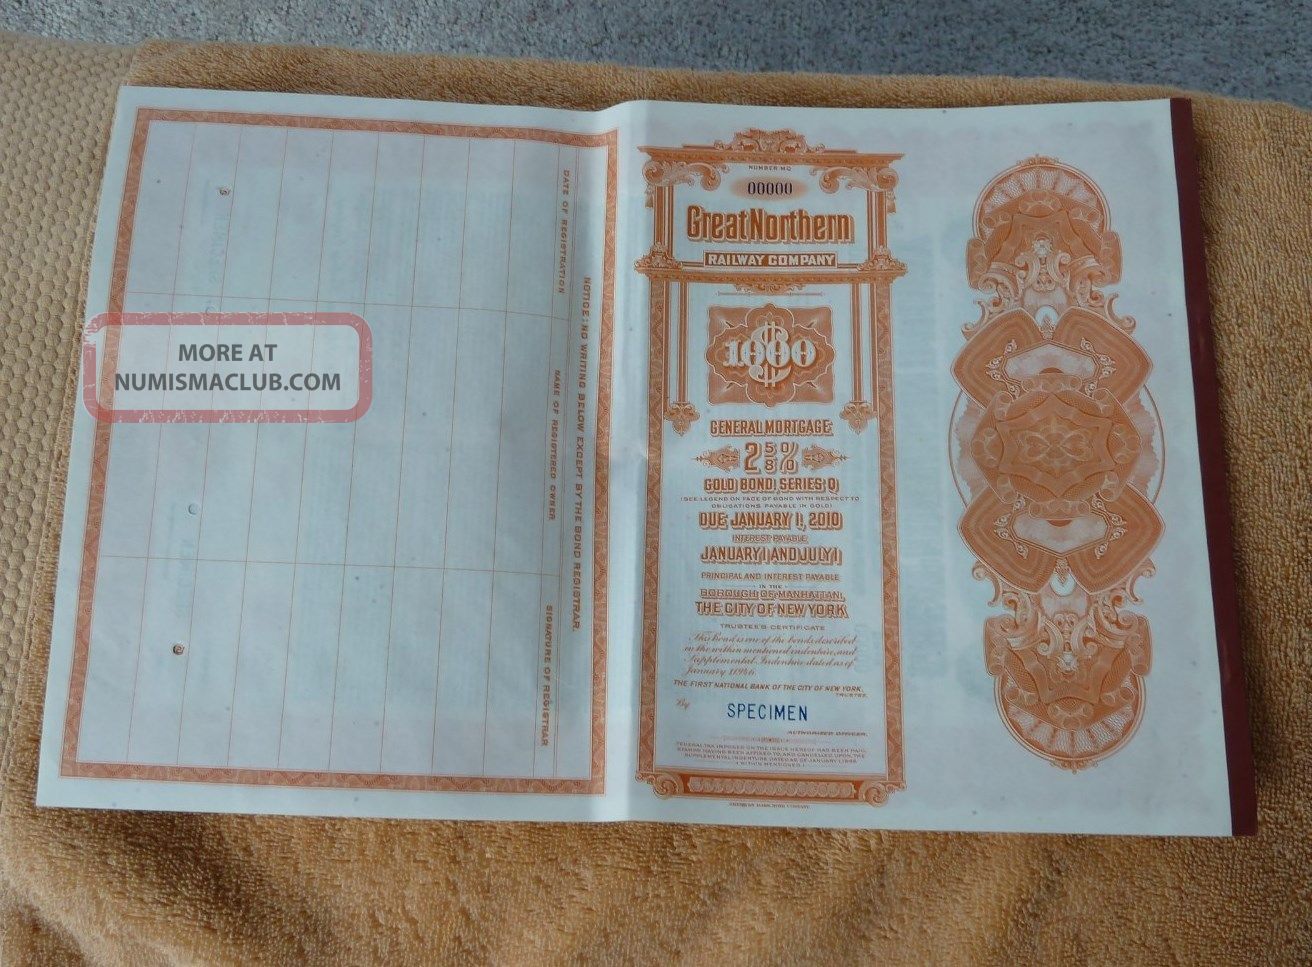 1946 Specimen - Great Northern Railway Coupon Bond $1000 - 64 Years - 128 Coupons Transportation photo